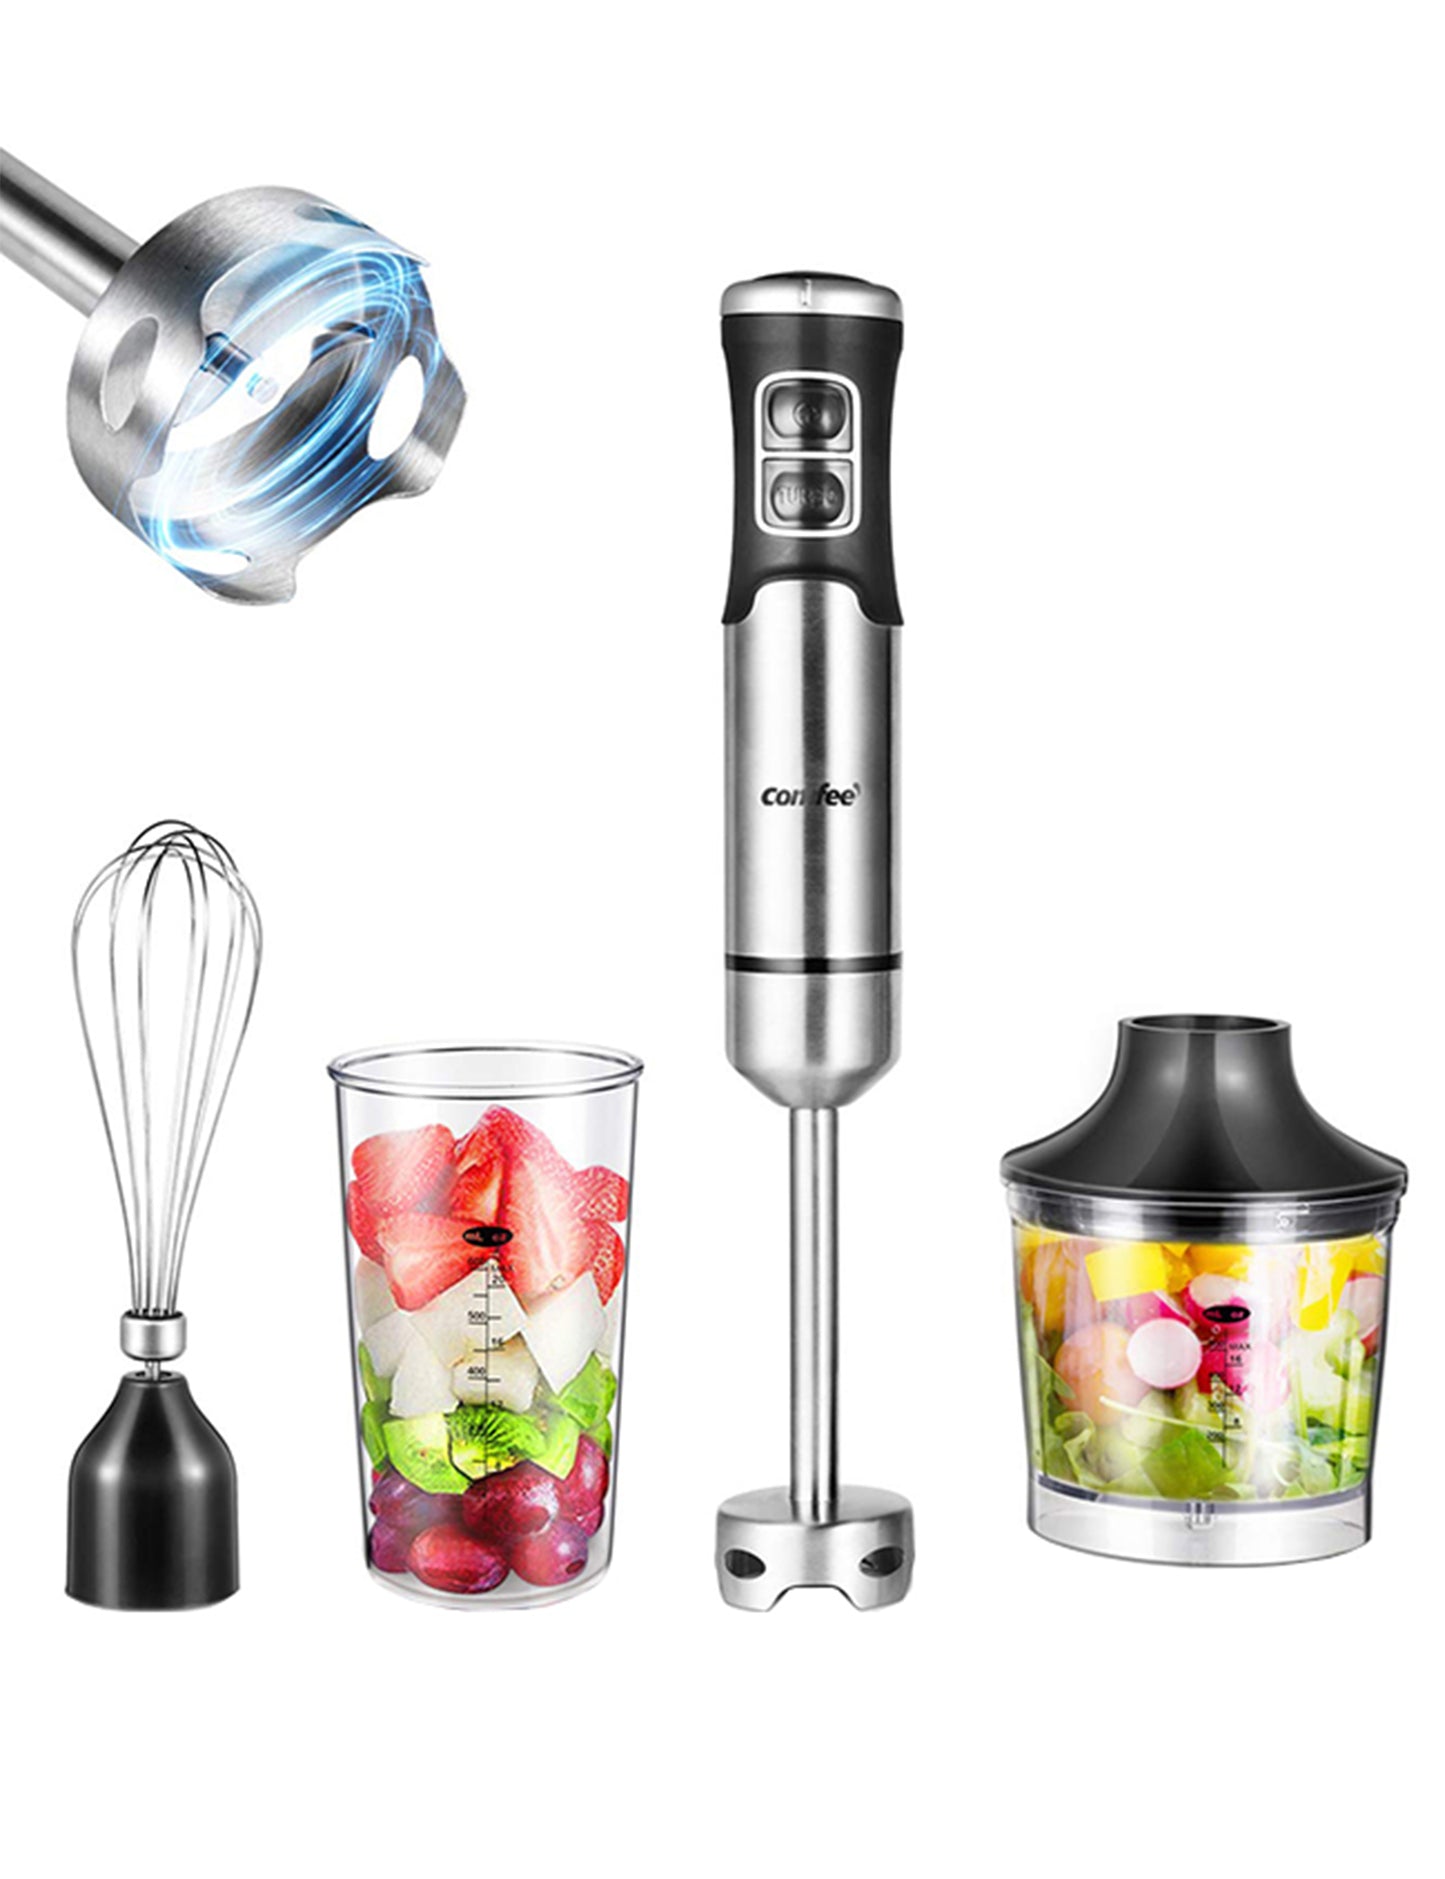 Hot Selling Electric Small Manual Hand Blender - Buy Hand Blender Stick  Mixer,Hand Operated Blender,Portable Blender Product on